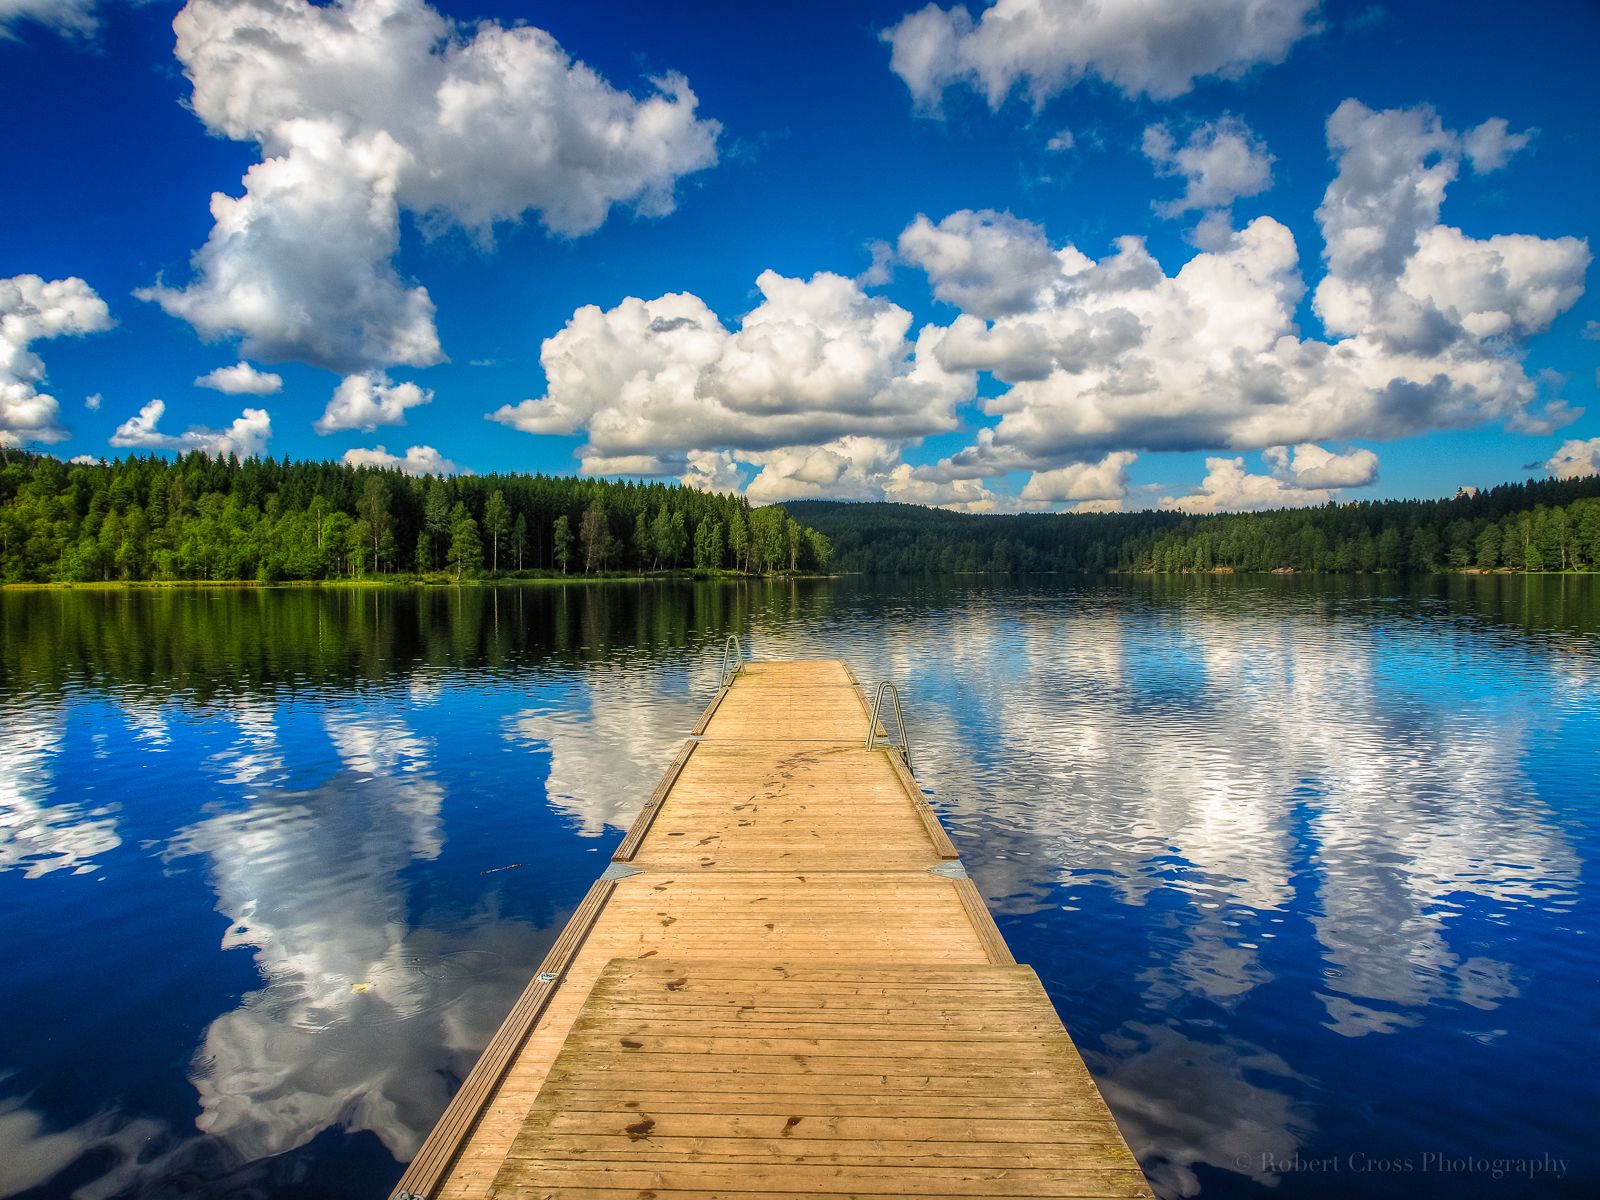 Wallpaper, summer, lake, reflection, water, Oslo, Norway, clouds, forest, landscape, pier, norge, Europe, bluesky, Olympus, Legacy, omd, sognsvann, m em microfourthirds, 1250mmf3563mzuiko 1600x1200